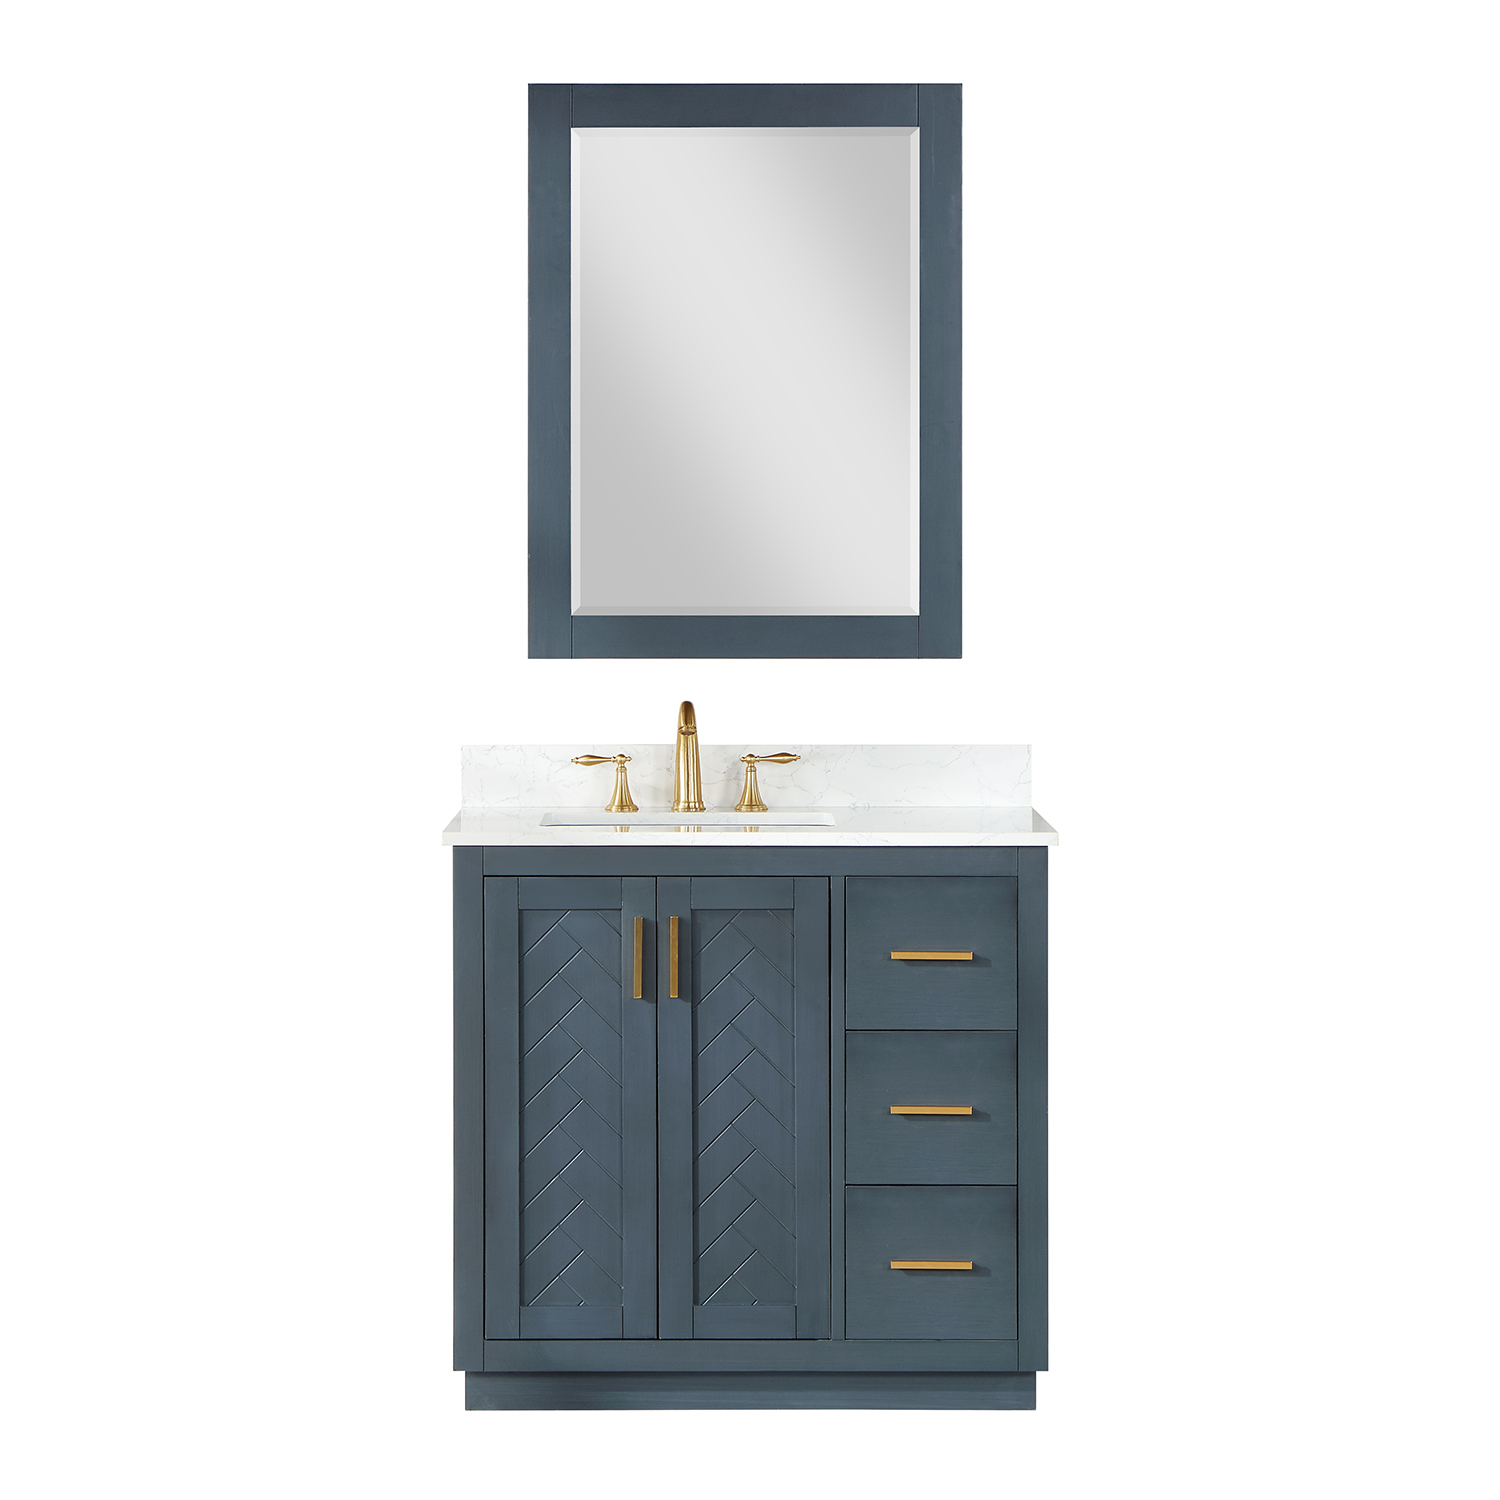 Issac Edwards Collection 36" Single Bathroom Vanity Set in Classic Blue with Grain White Composite Stone Countertop without Mirror 